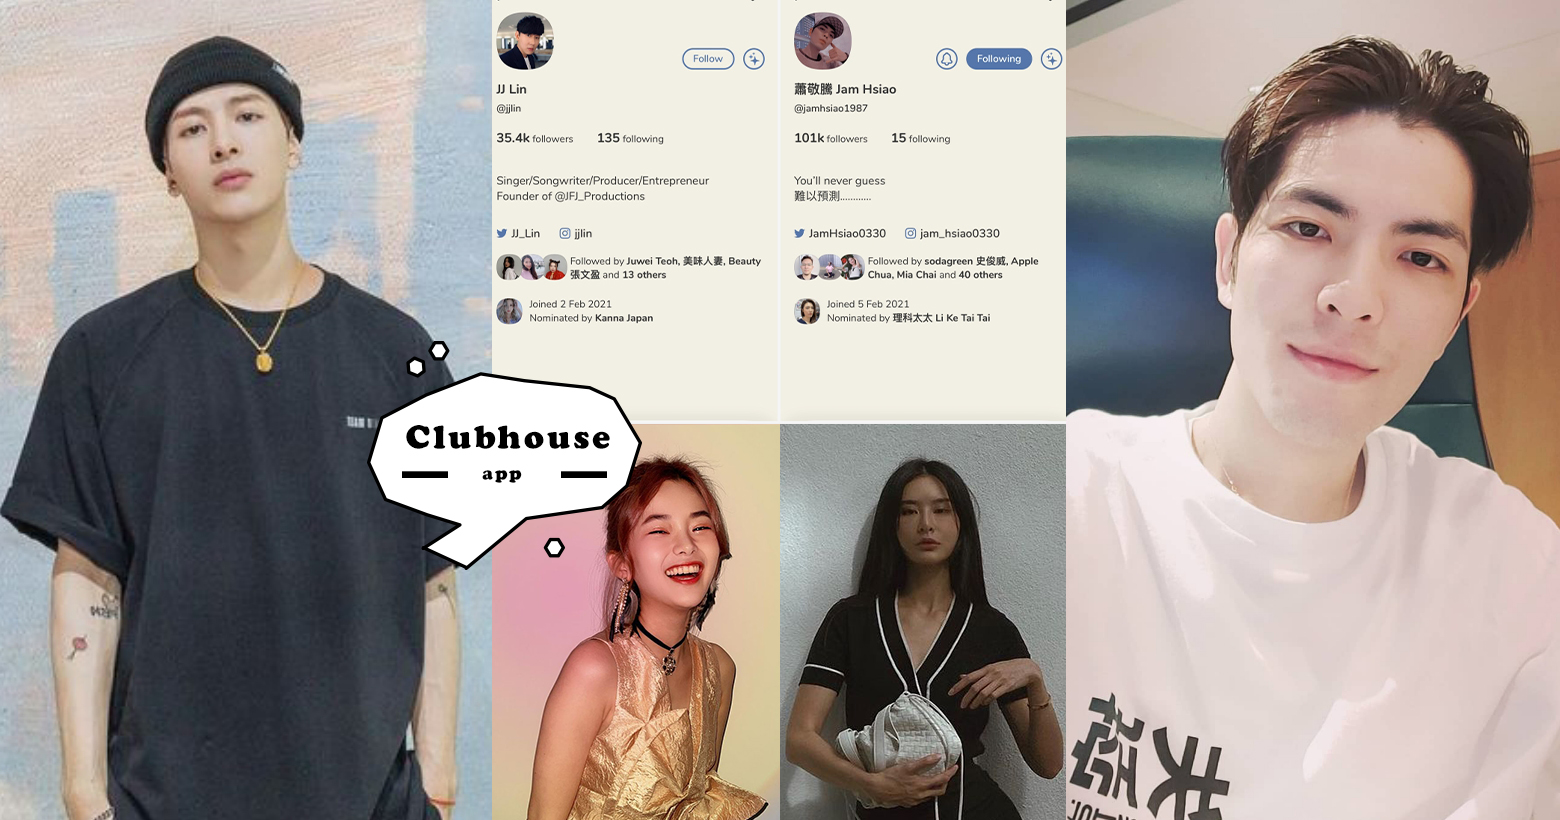 Clubhouse 有名人